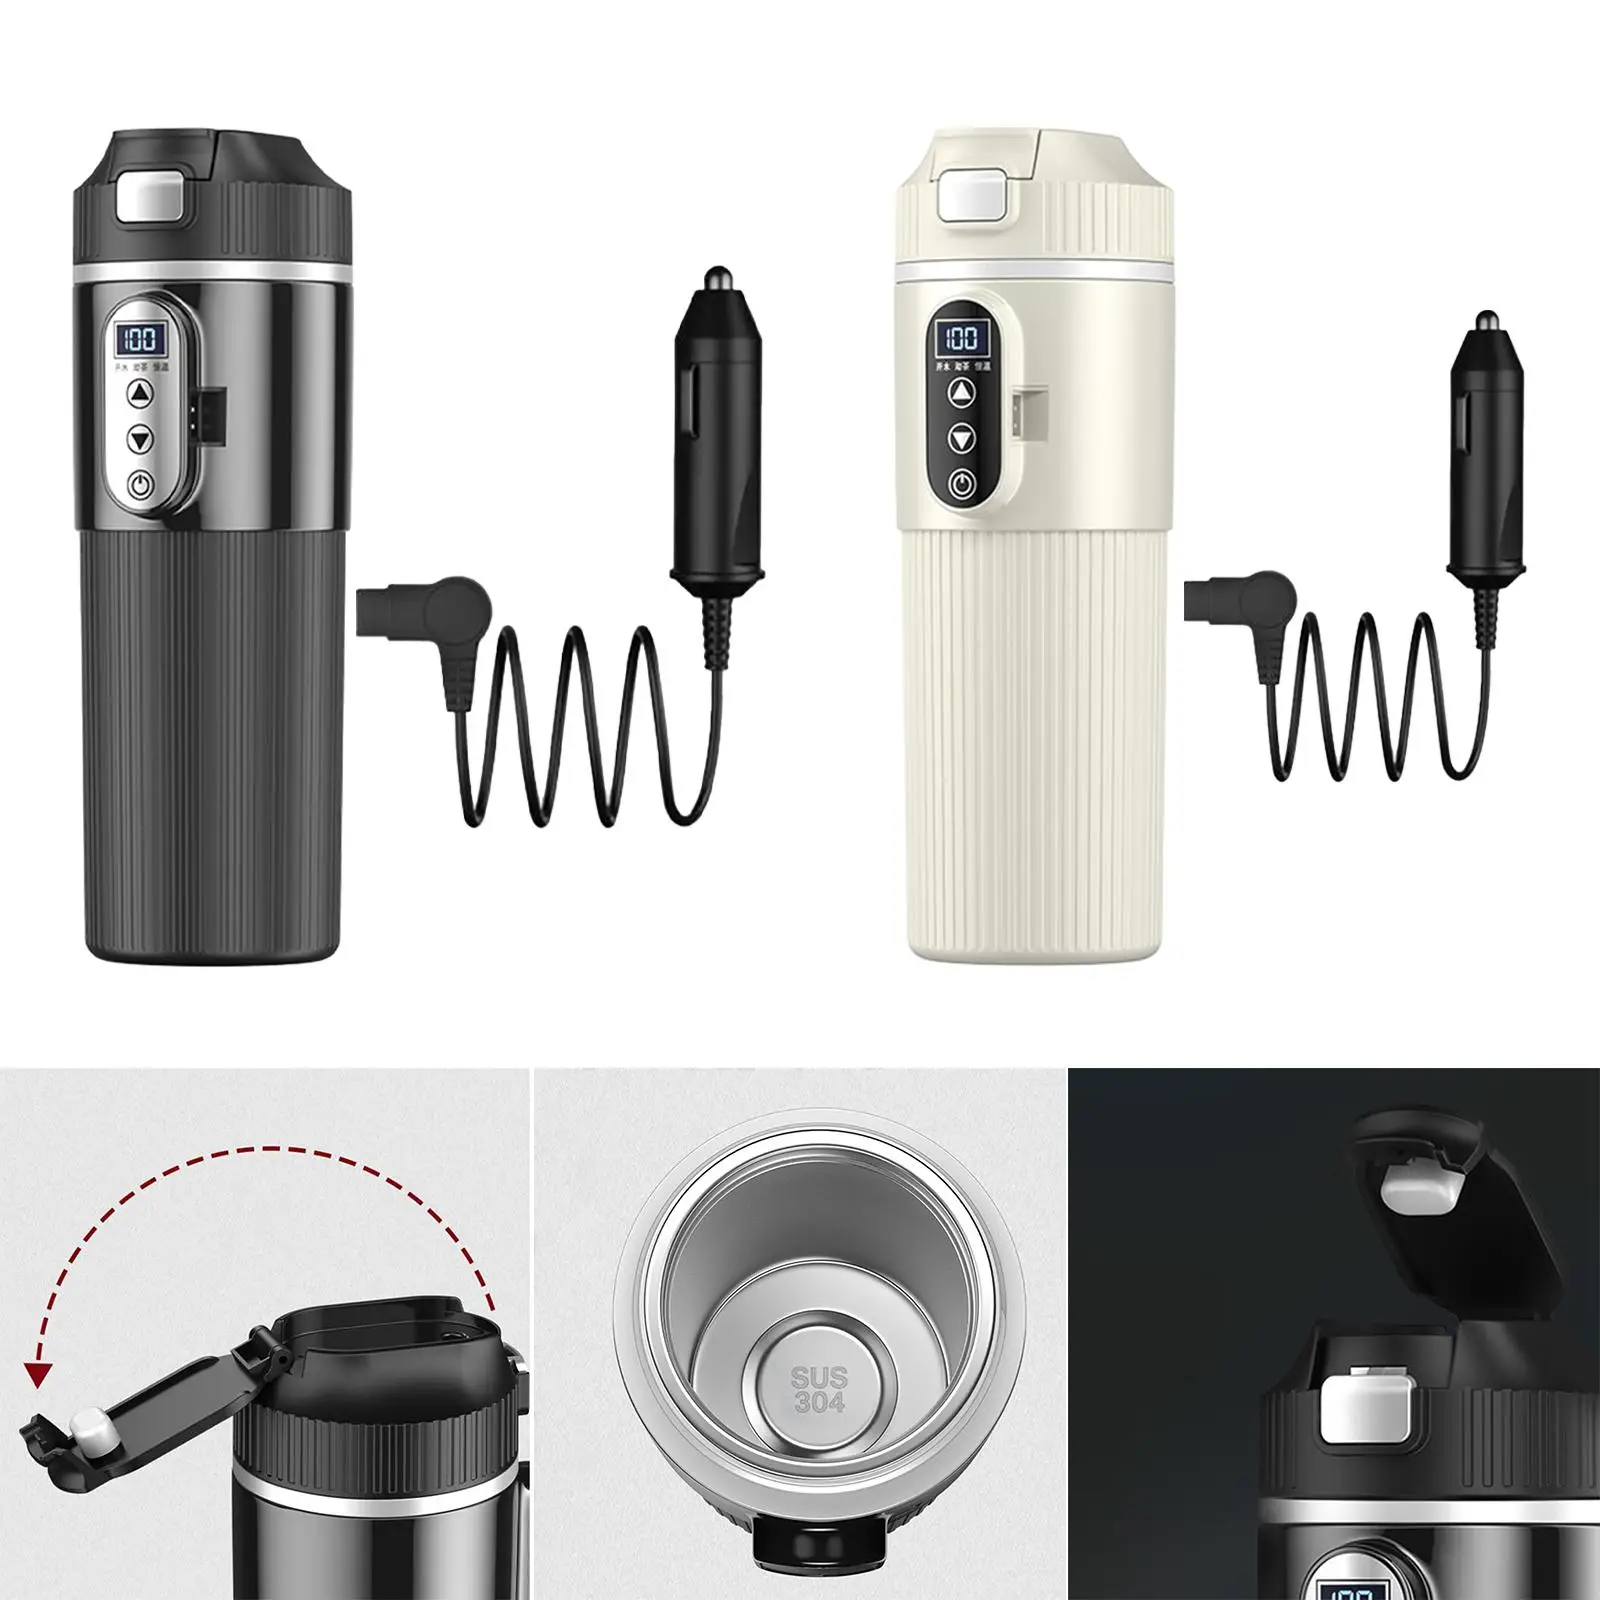 Car Heating Cup Stainless Steel Electric Heat Water Cup Coffee Mug for Tea Beverage Heating Water Camping